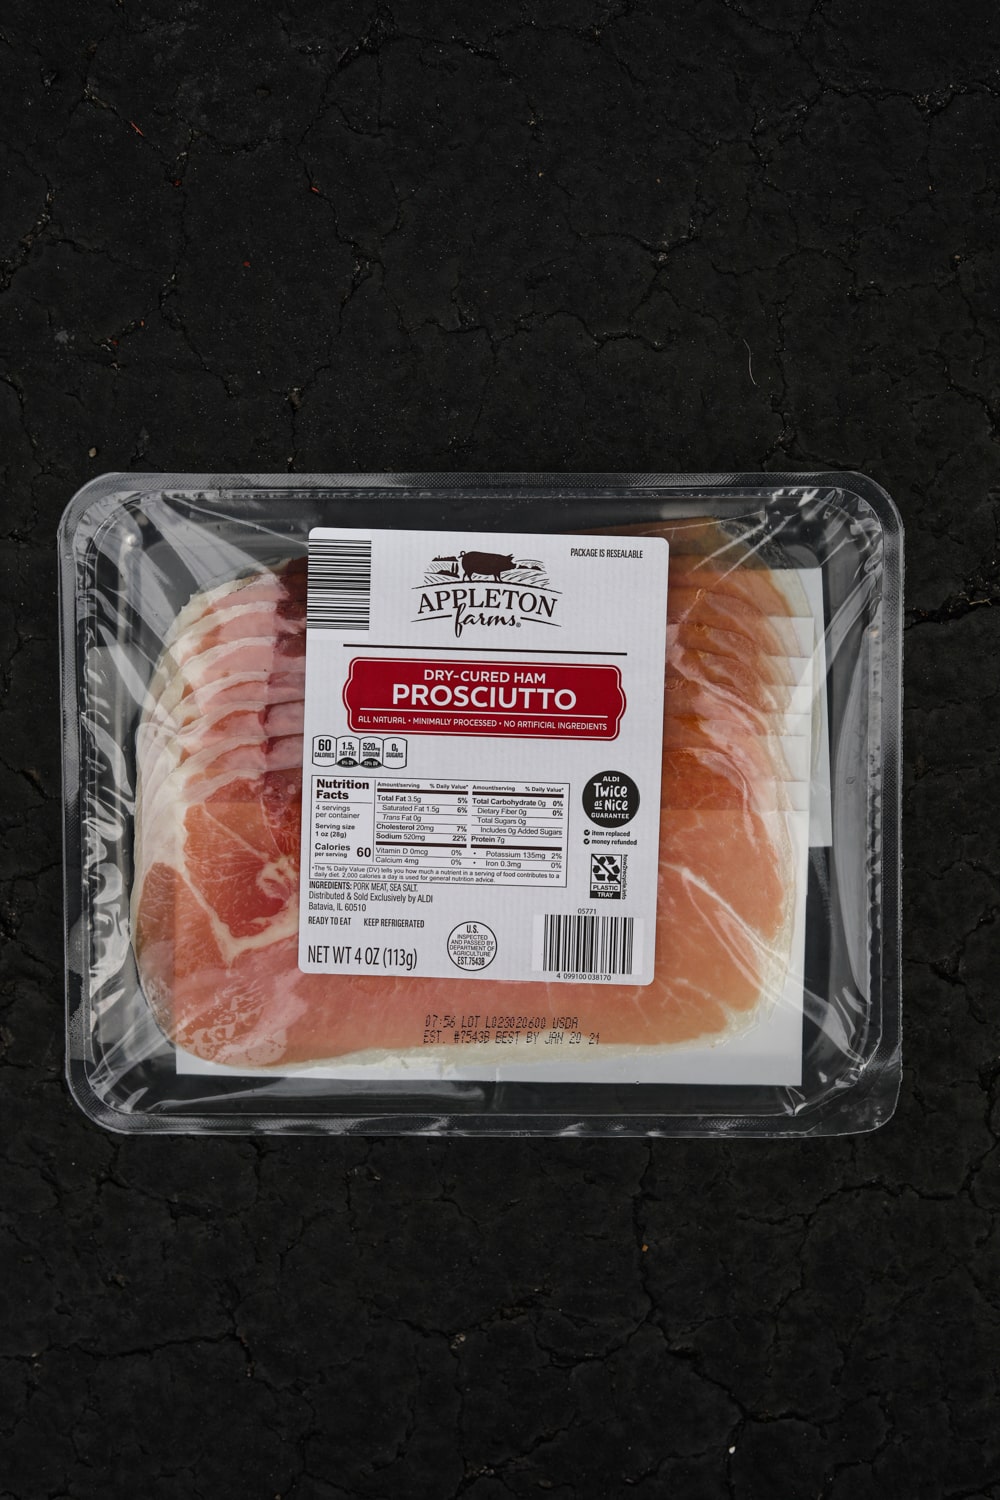 A package of prosciutto.